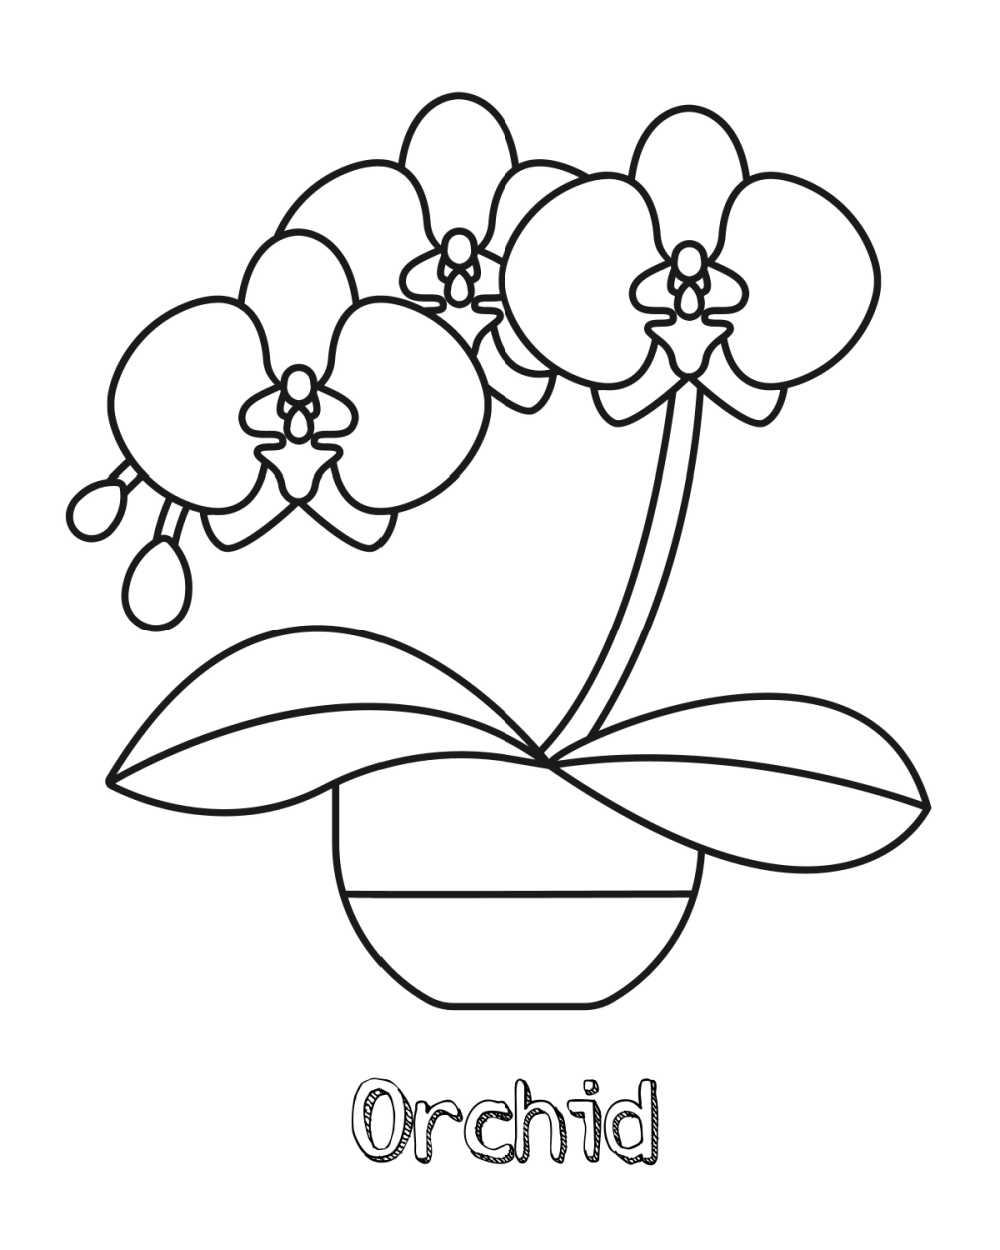 Free Printable Orchid Coloring Page   Mama Likes This